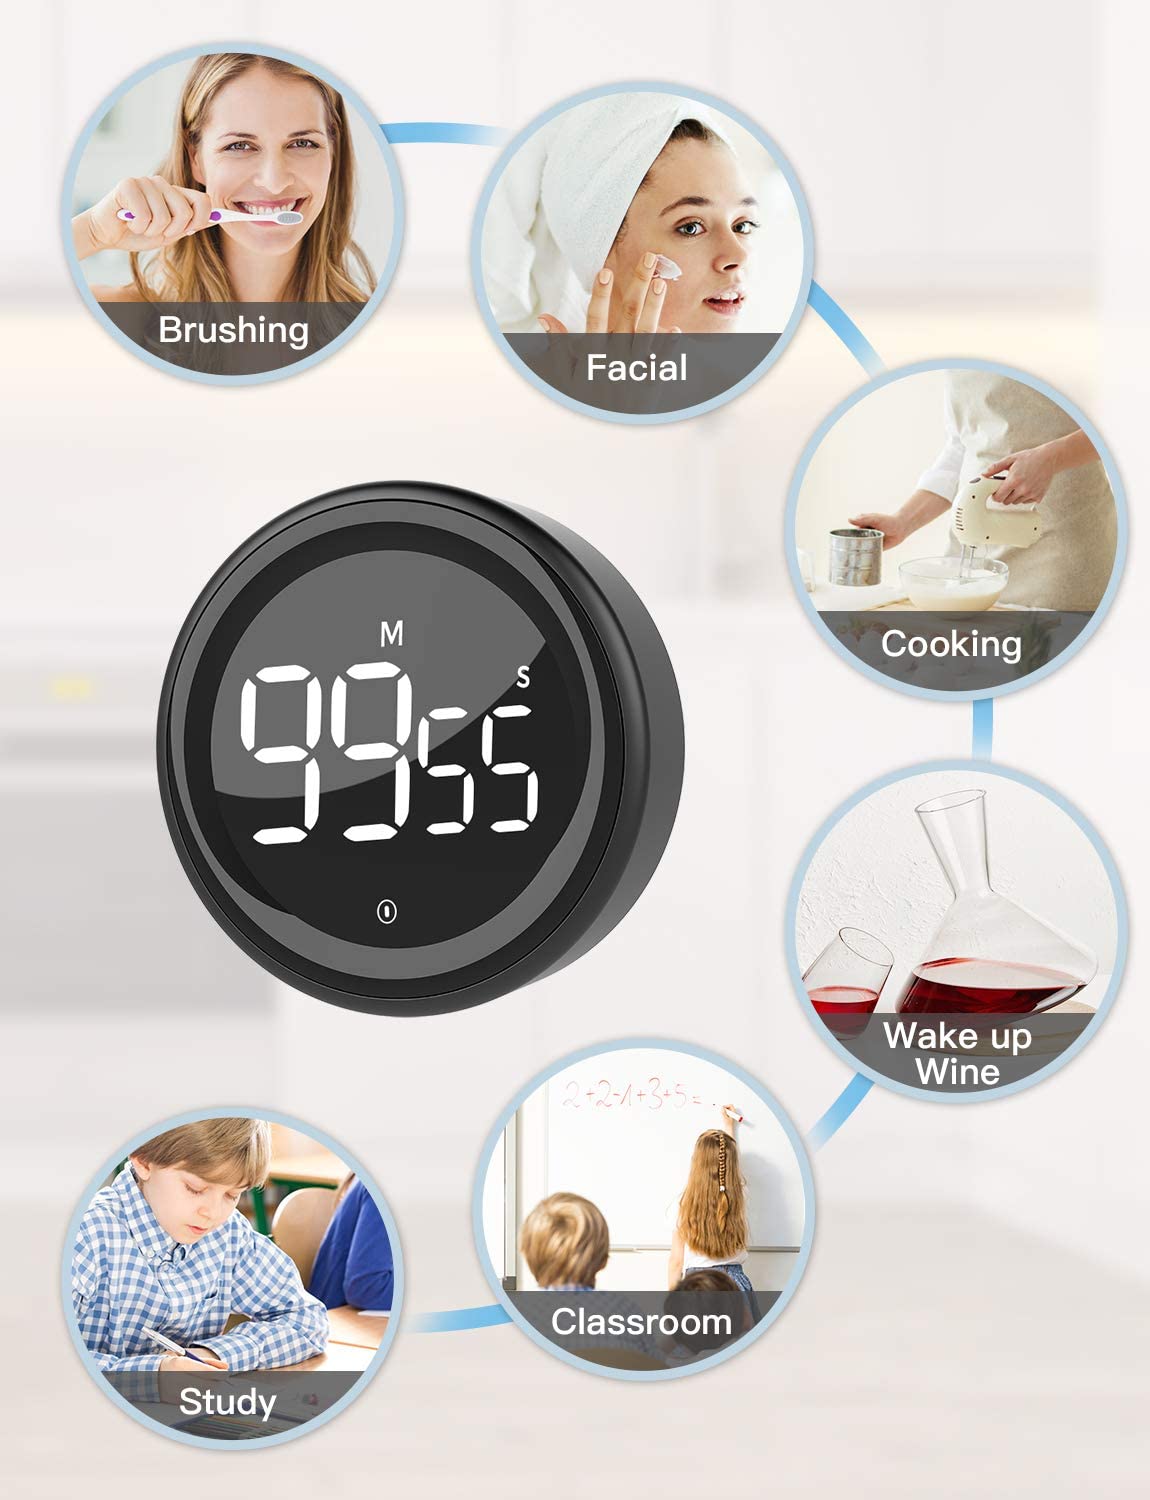 4 Piece Digital Kitchen Timer, Big Digit Countdown Timer, Loud Alarm Timers,  Magnetic Back and Off Switch, Classroom Timer for Teachers Kids, Countdown  and Minute Countdown. 